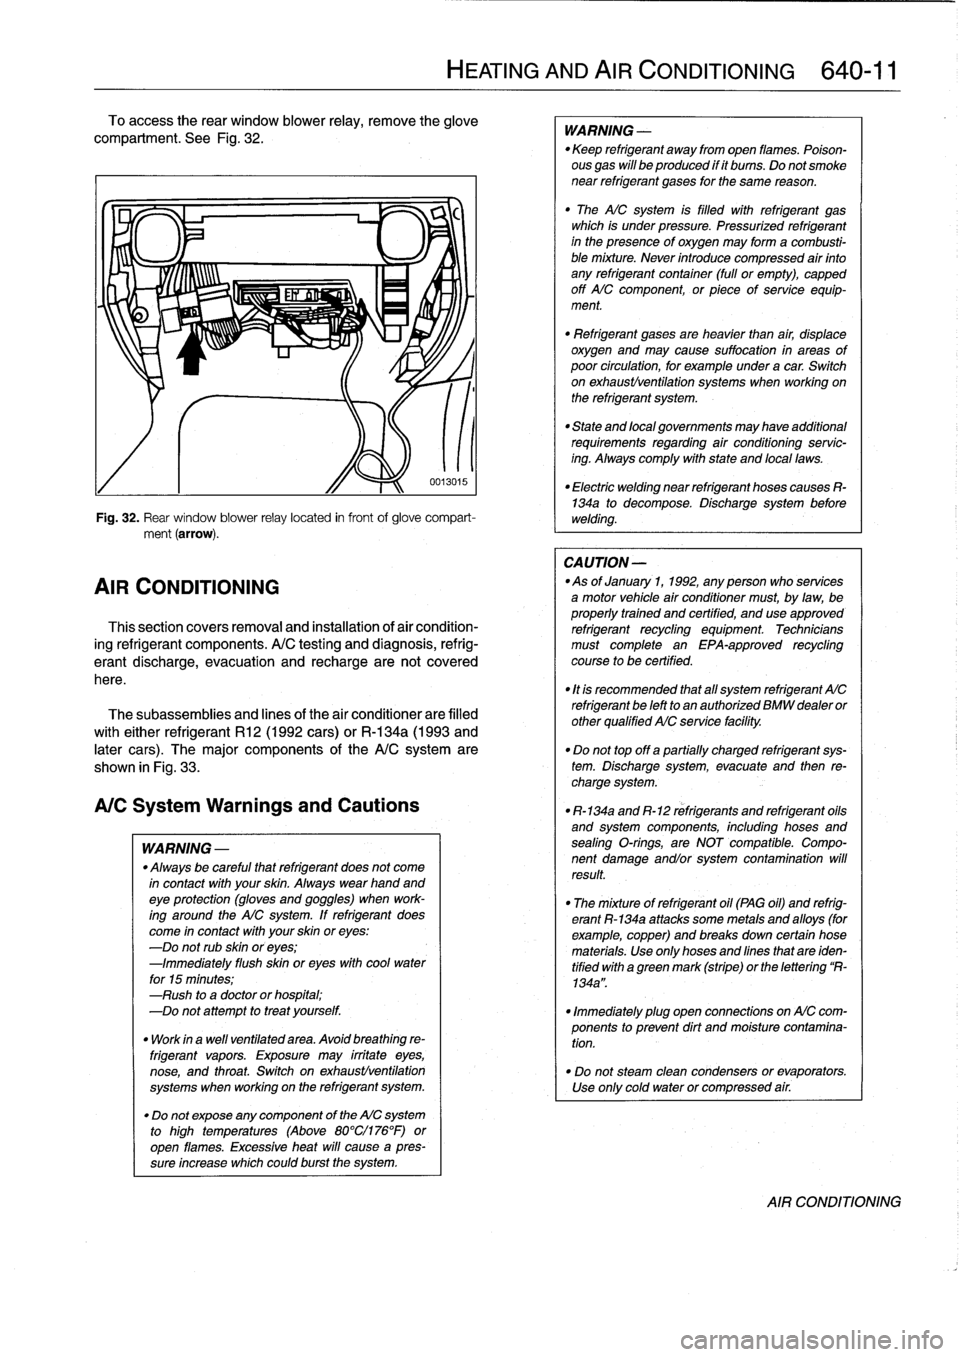 BMW 328i 1998 E36 User Guide To
access
the
rear
window
blower
relay,
remove
the
glove
compariment
.
See
Fig
.
32
.

Fig
.
32
.
Rear
window
blower
relay
located
in
frontof
glove
compart-
ment
(arrow)
.

AIR
CONDITIONING

Thissecti